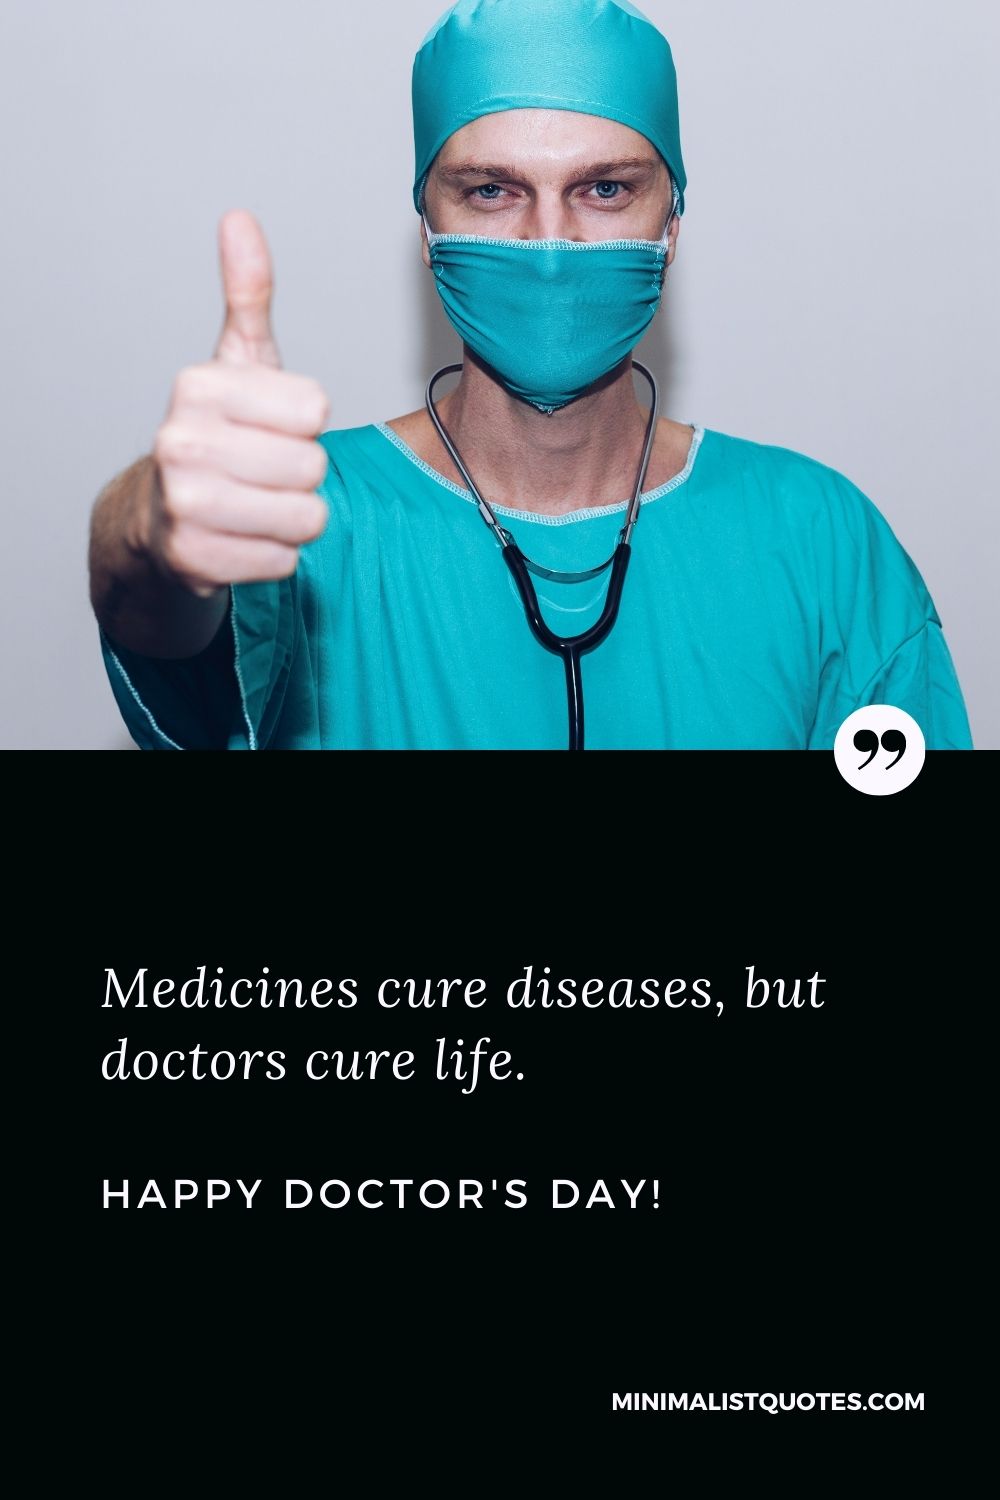 Doctor's Day Quote With Image: Medicines cure diseases, but doctors cure life. Happy Doctor's Day!